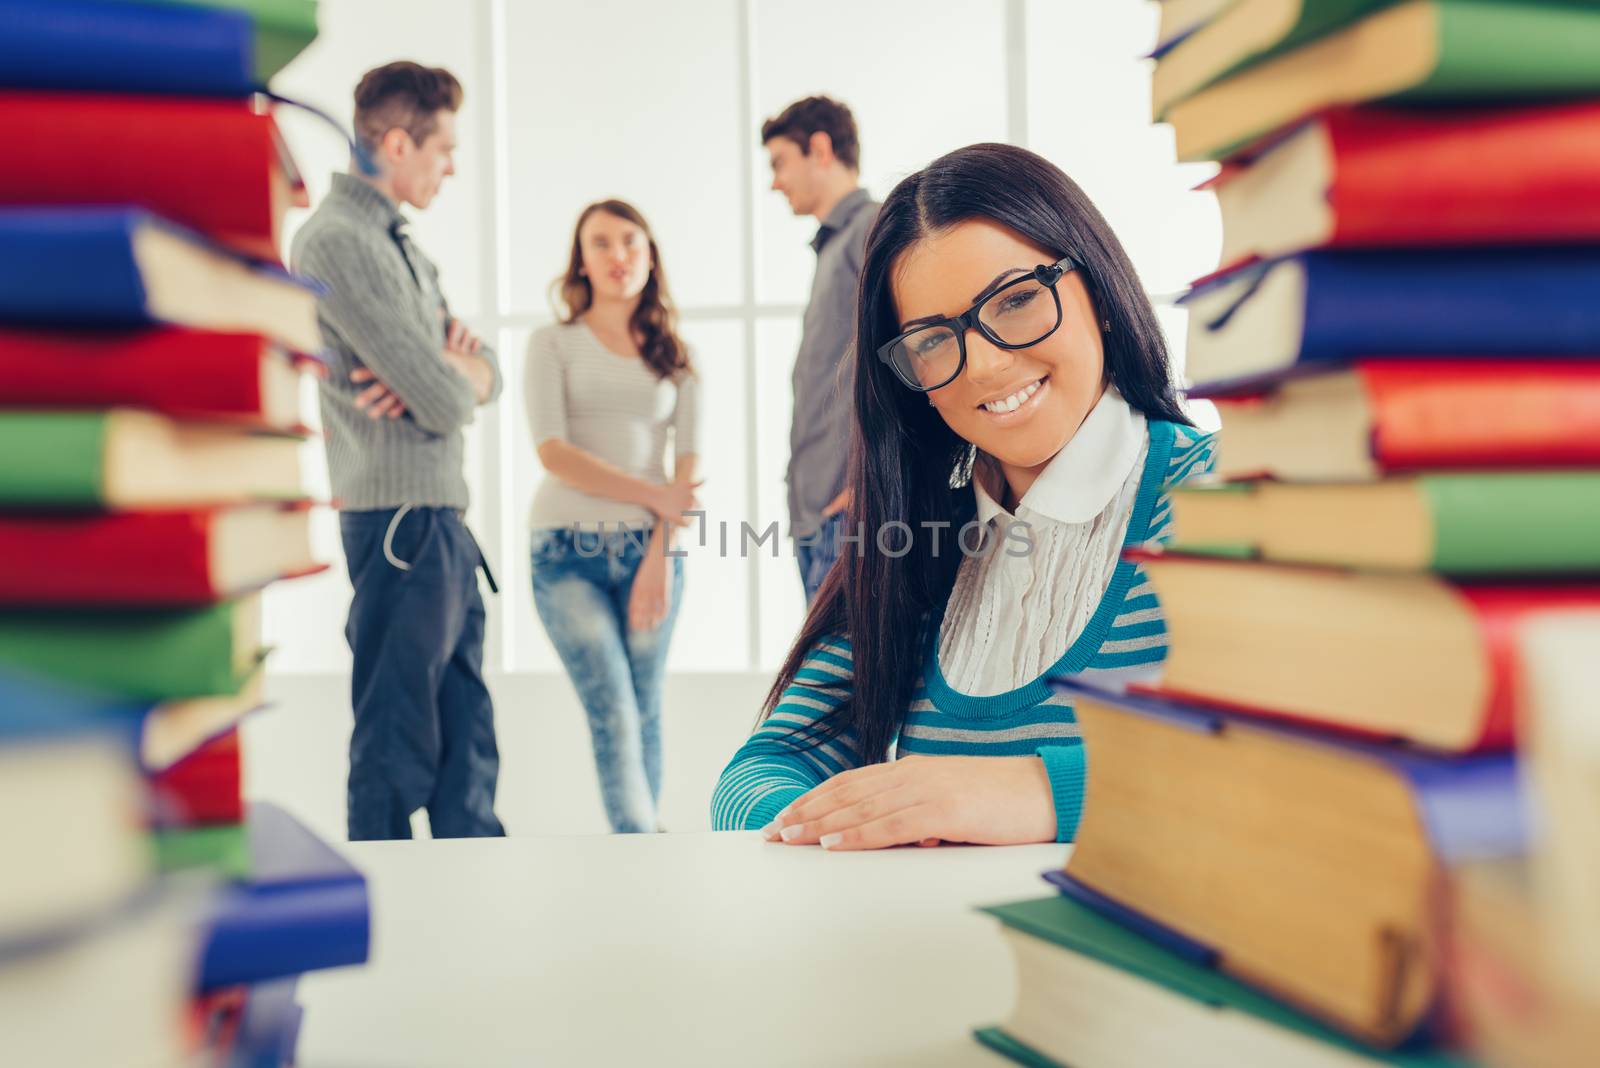 Portrait of a beautiful smiling girl with glasses sitting behind the many books in the foreground. Looking at camera. A her friends standing  is behind her and talking.